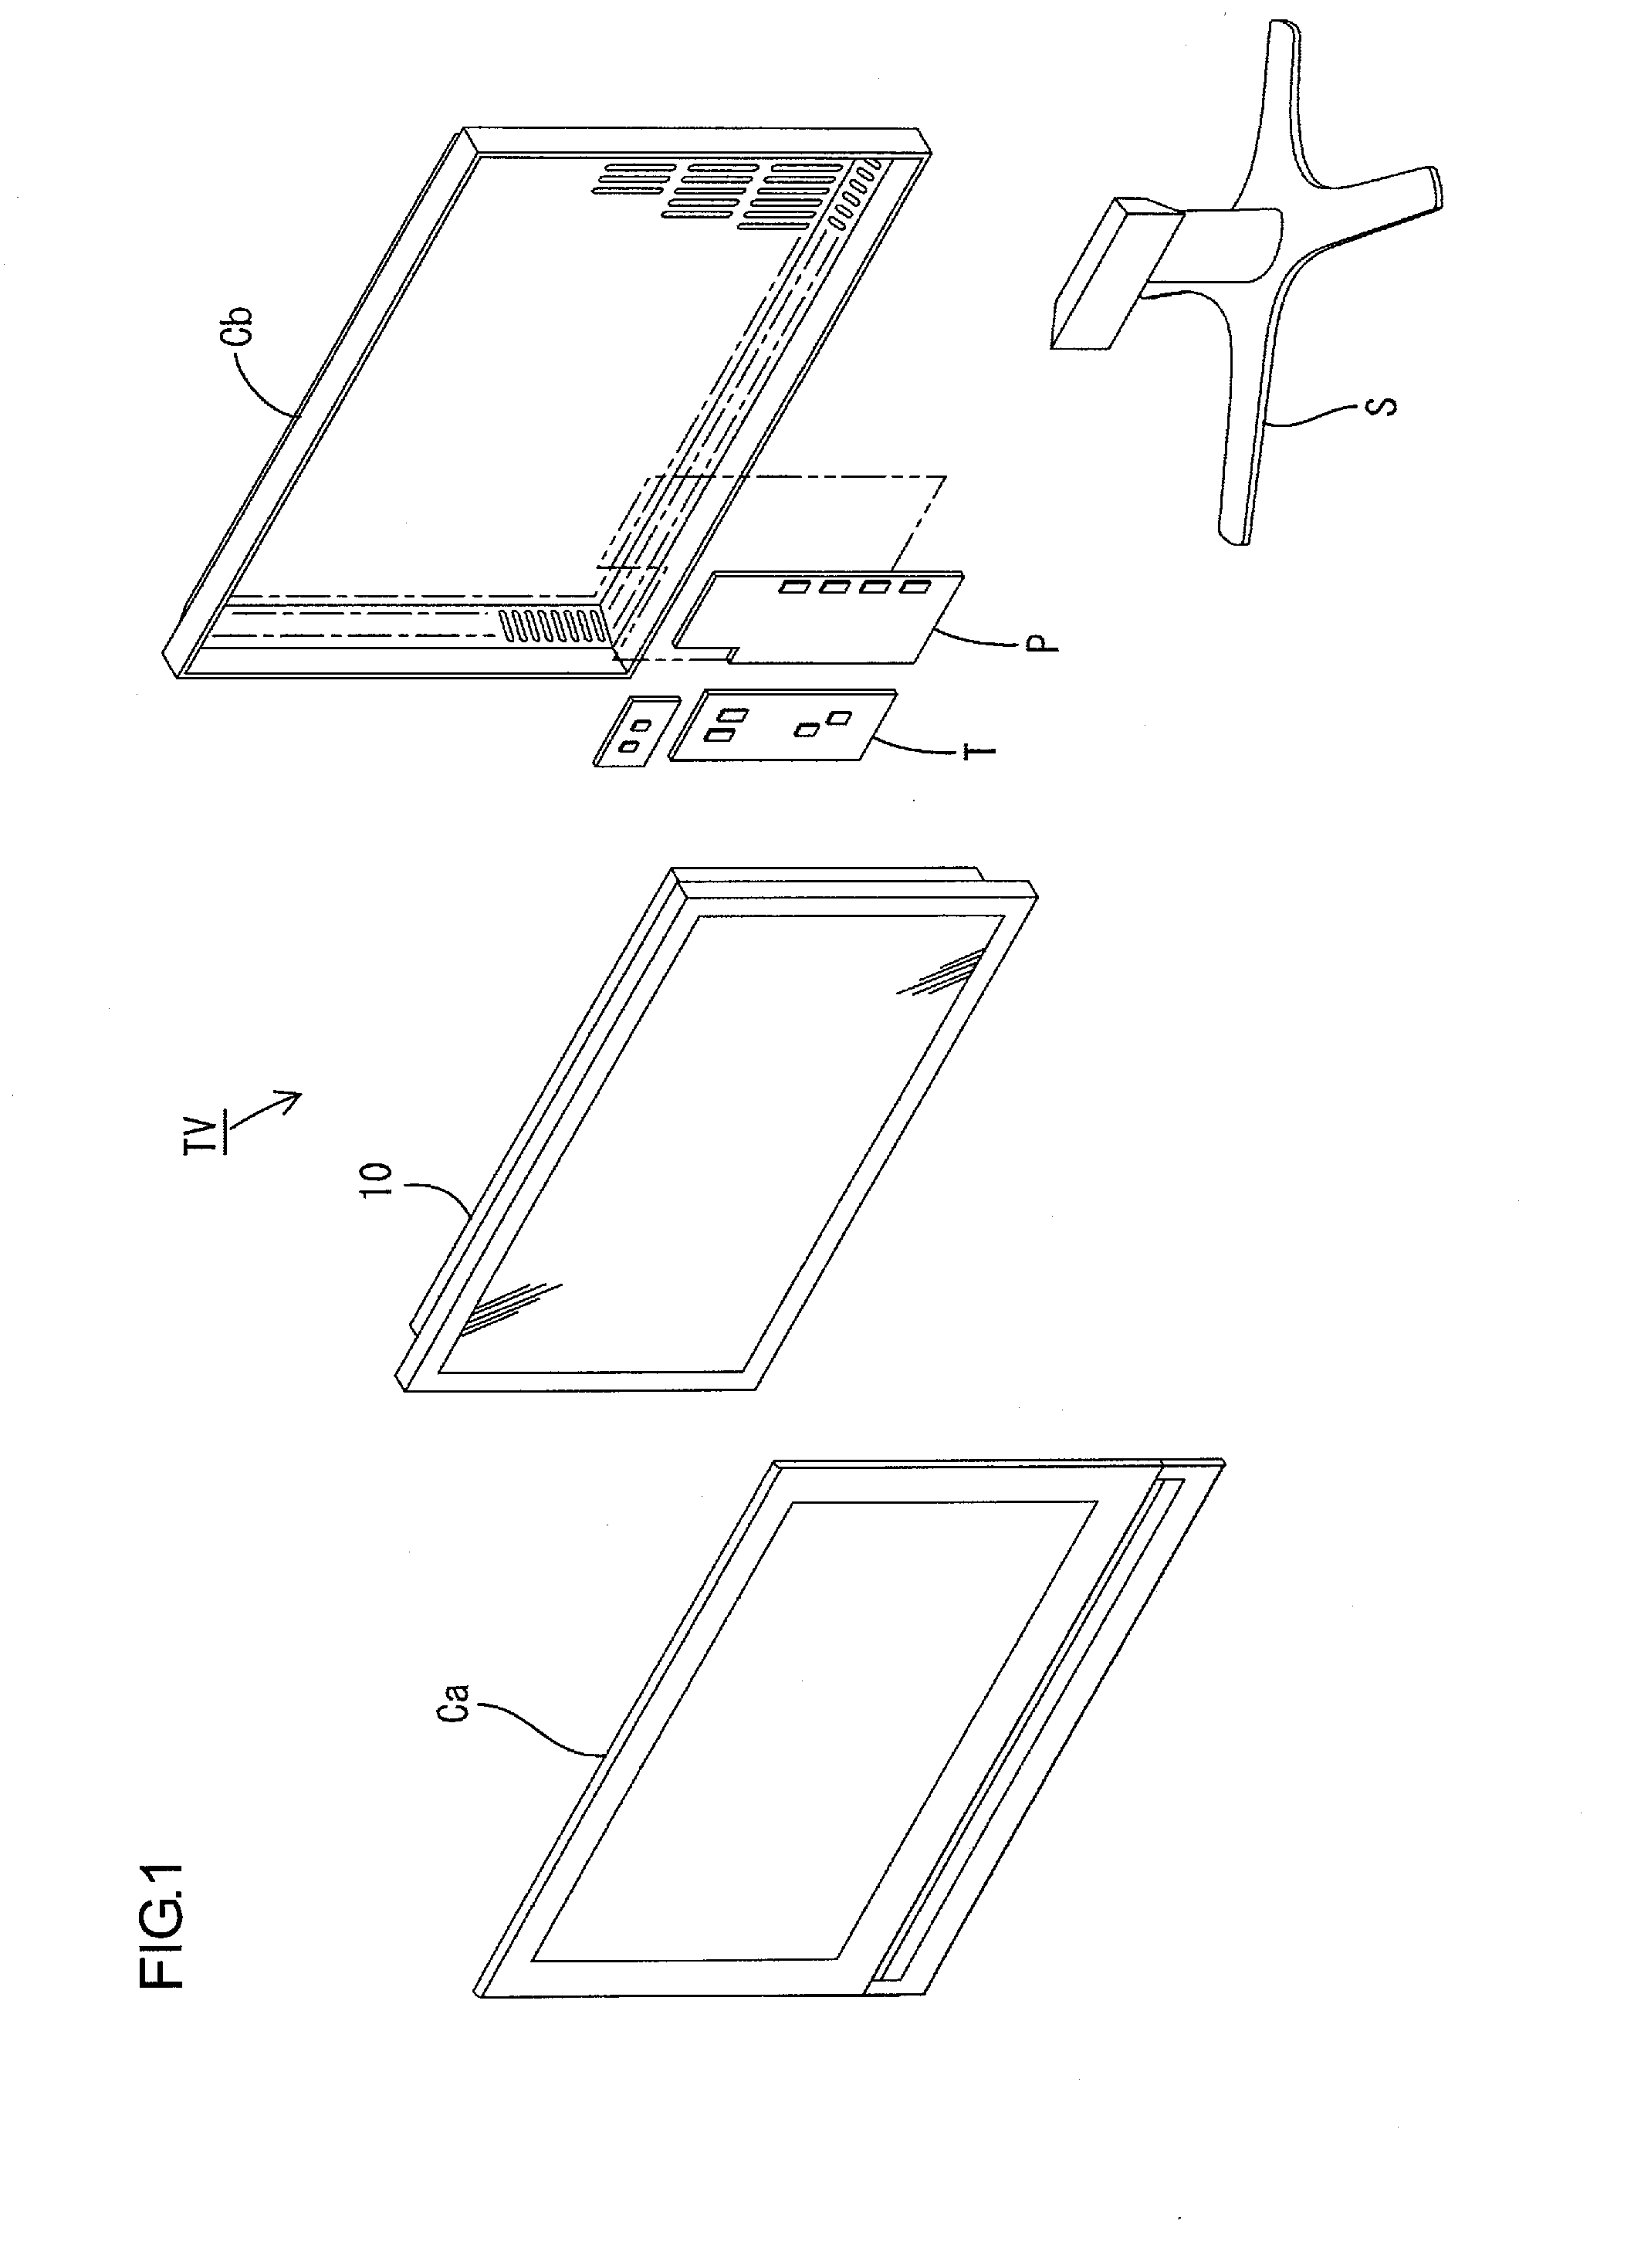 Illumination device, display device, and television receiver apparatus